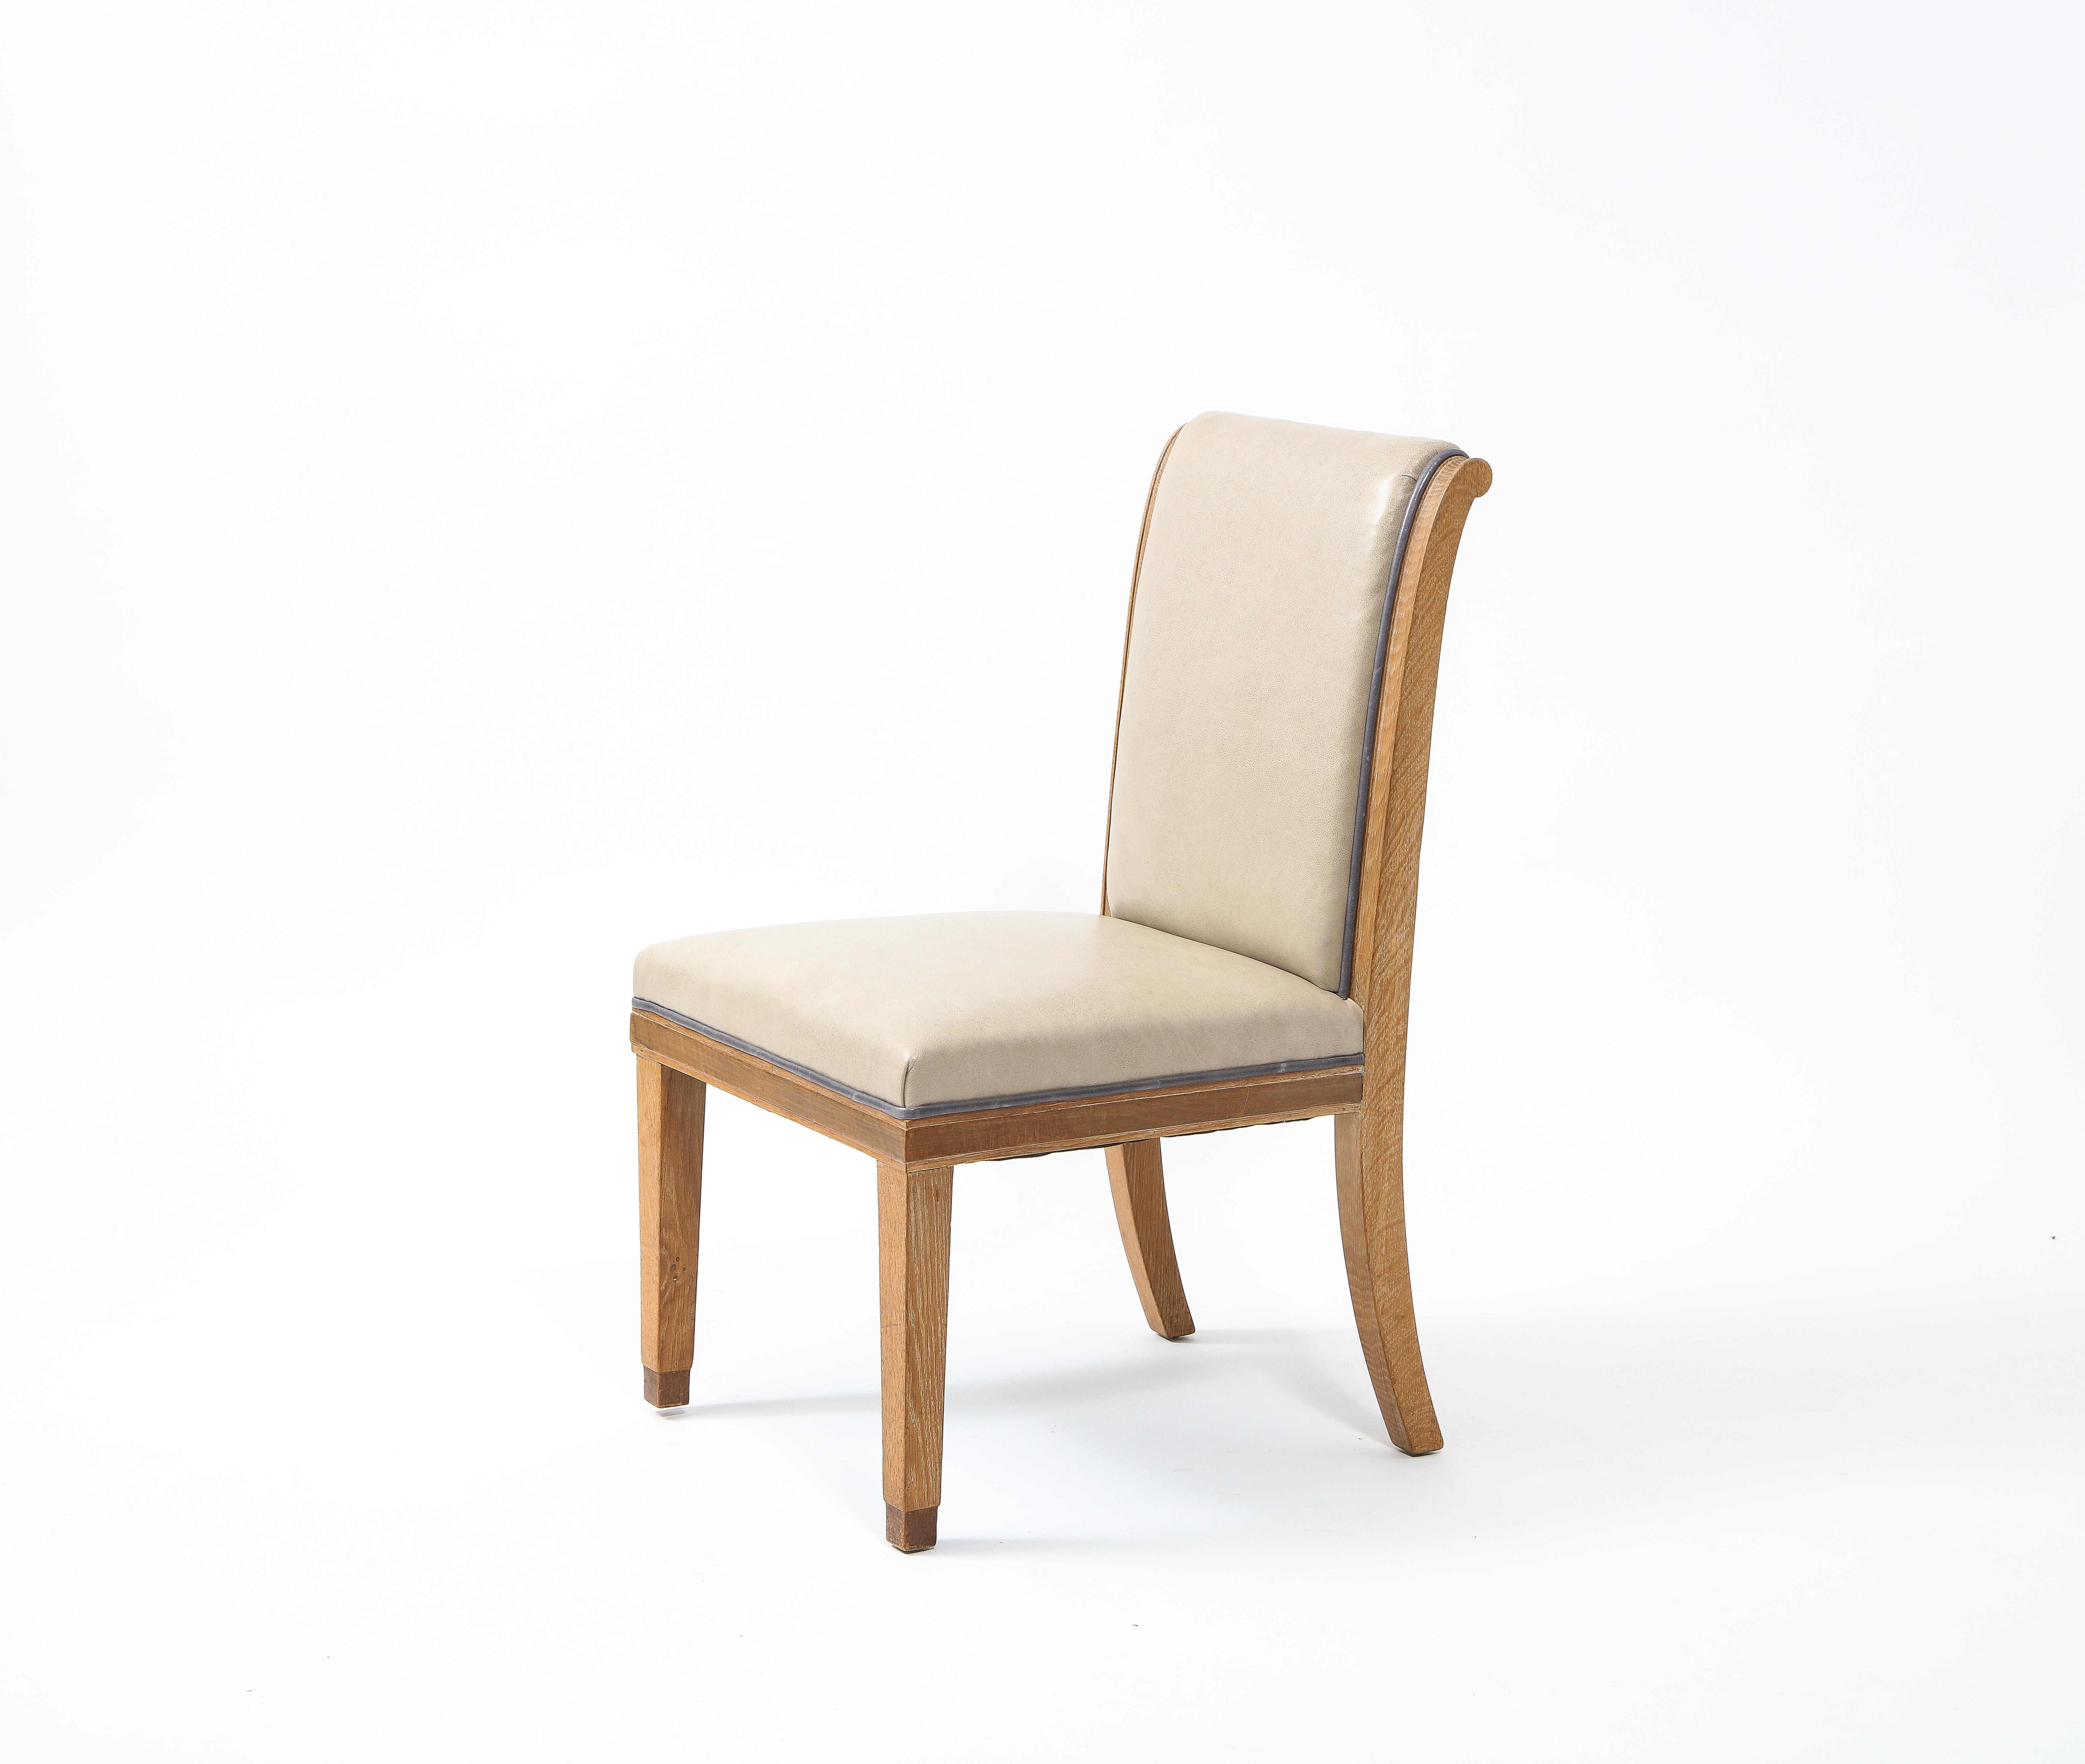 A set of 10 custom dining chairs designed in the French Art Deco tradition after Leleu and Ruhlmann, among the most prominent visionaries behind the movement that defined French design in 1930's and 1940's. These simple, classic forms are well